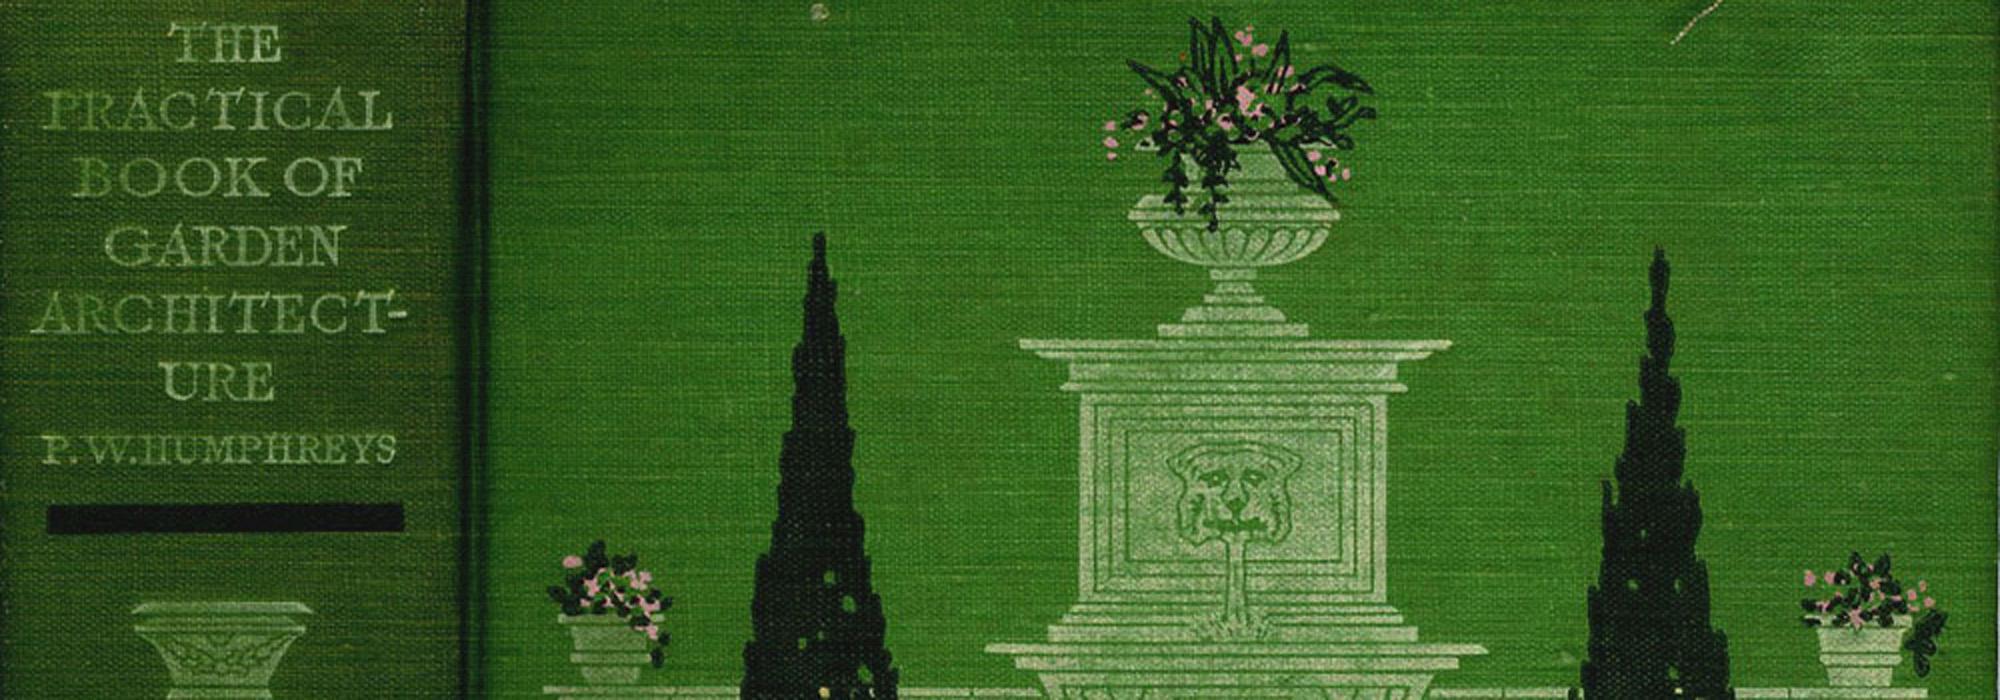 Cover, The Practical Book of Garden Architecture, 1914